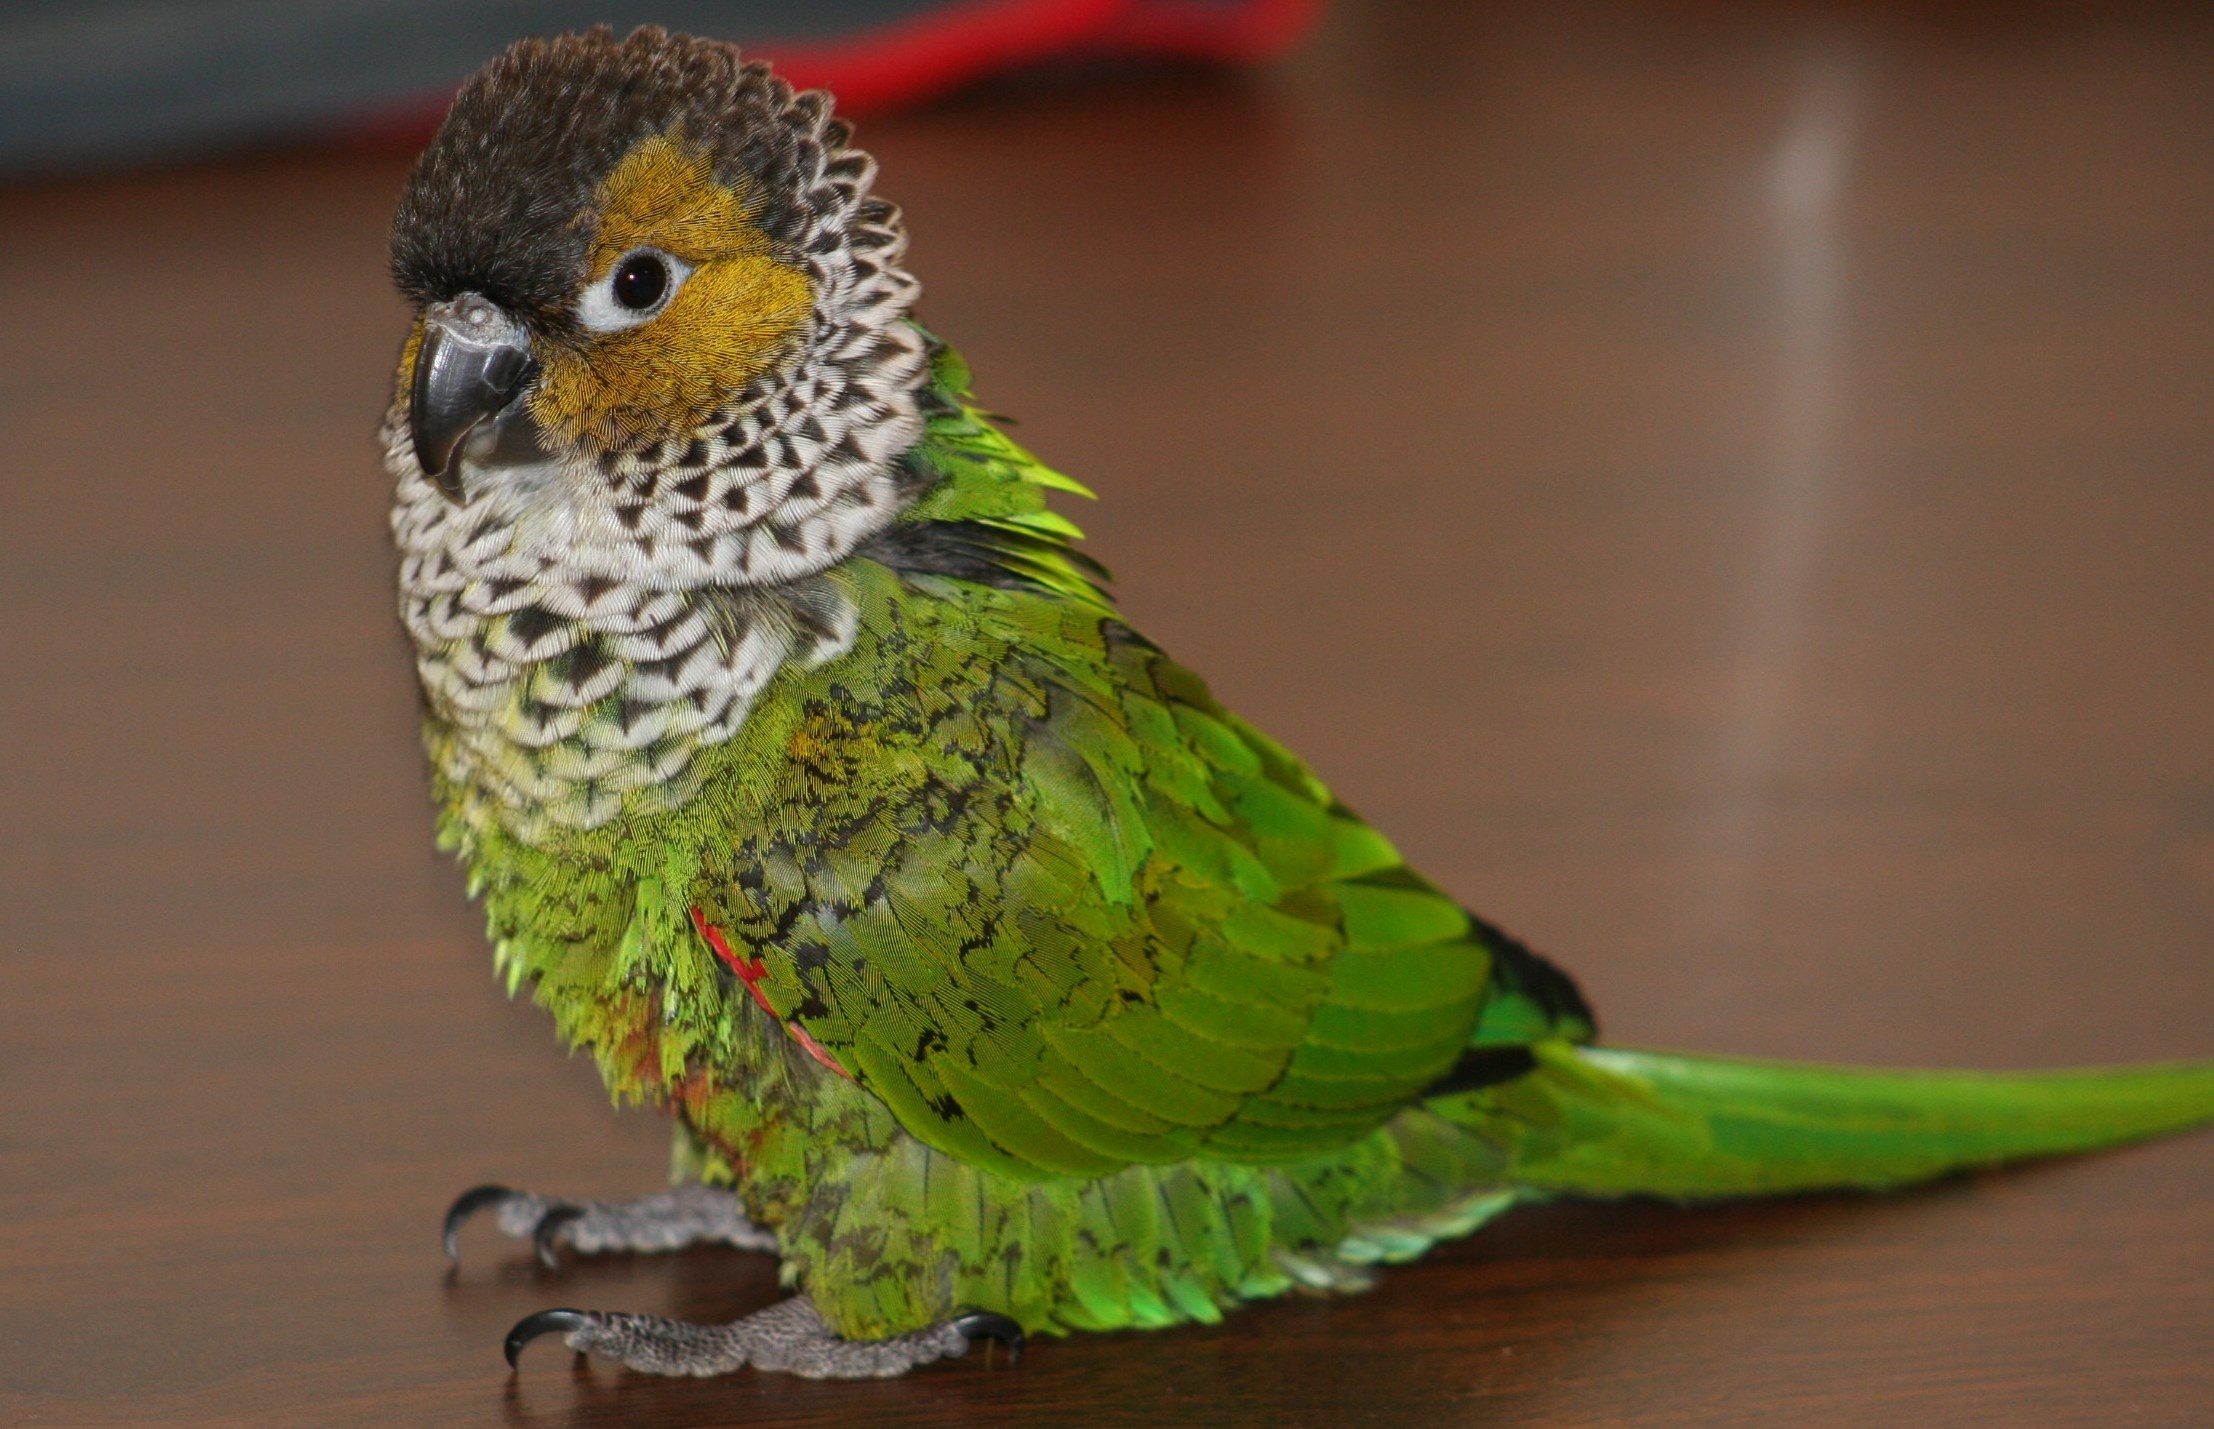 A photo of a colorful bird sitting on a table.